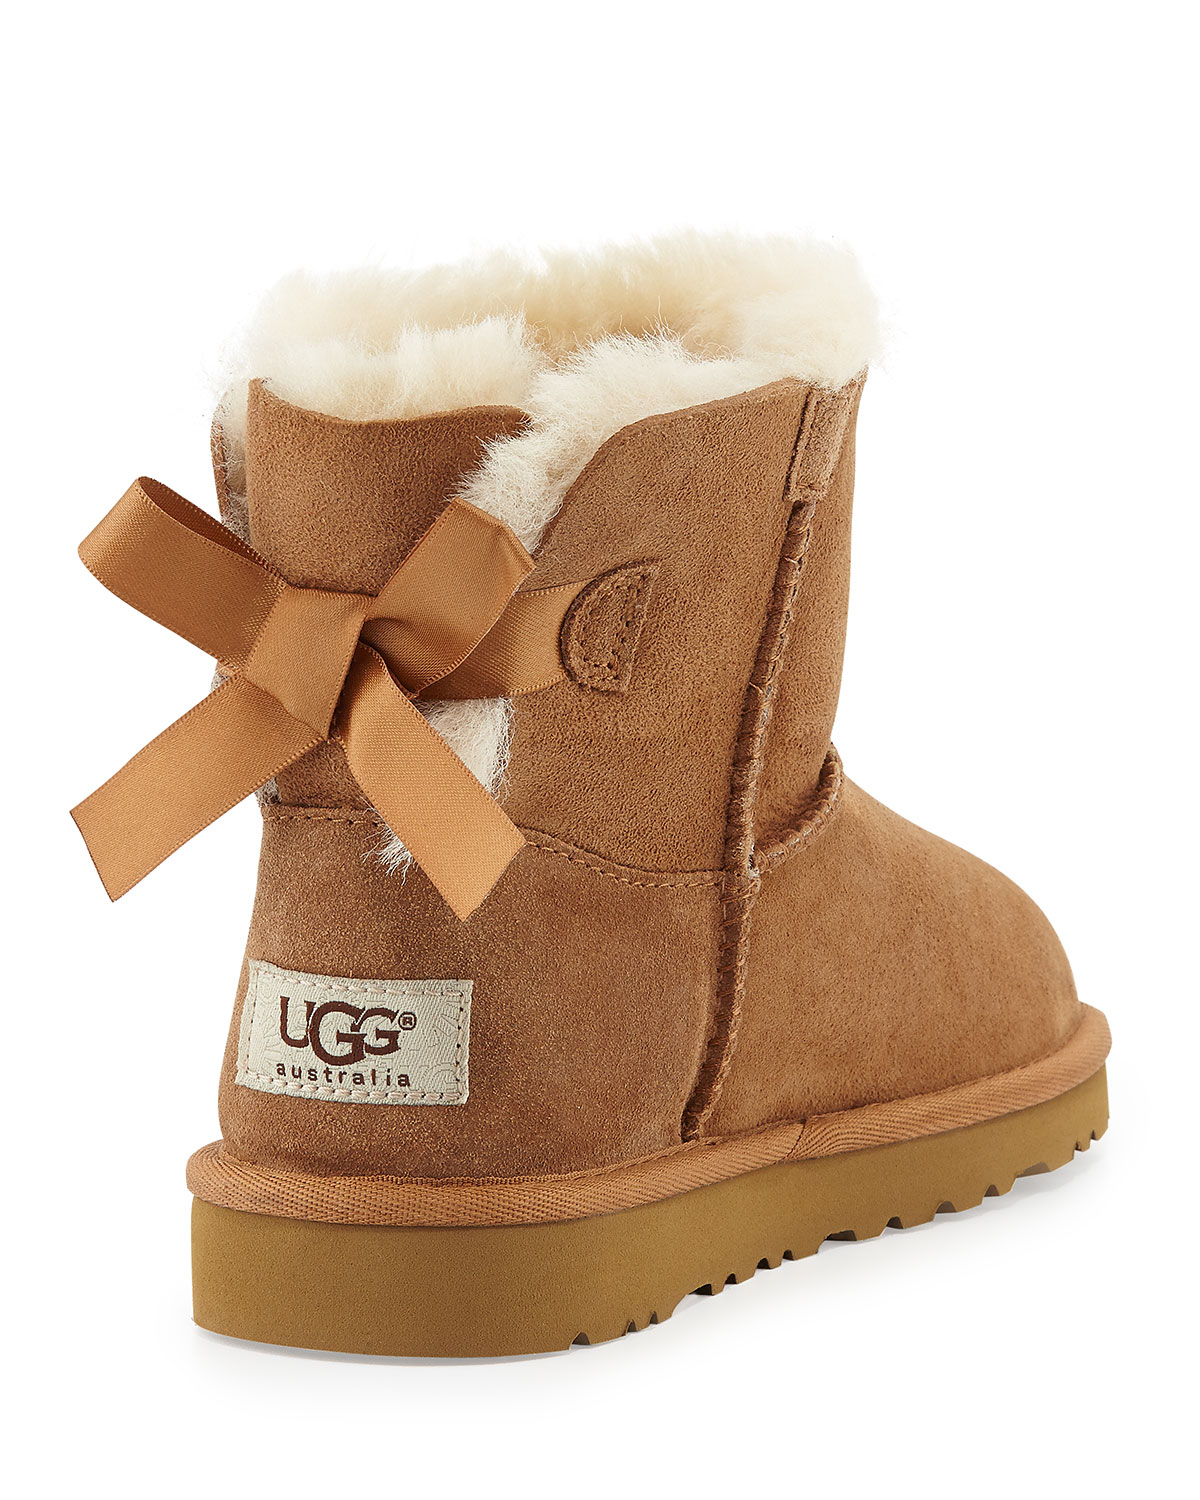 Lyst - Ugg Kids Mini Bailey Bow Short Boots in Brown